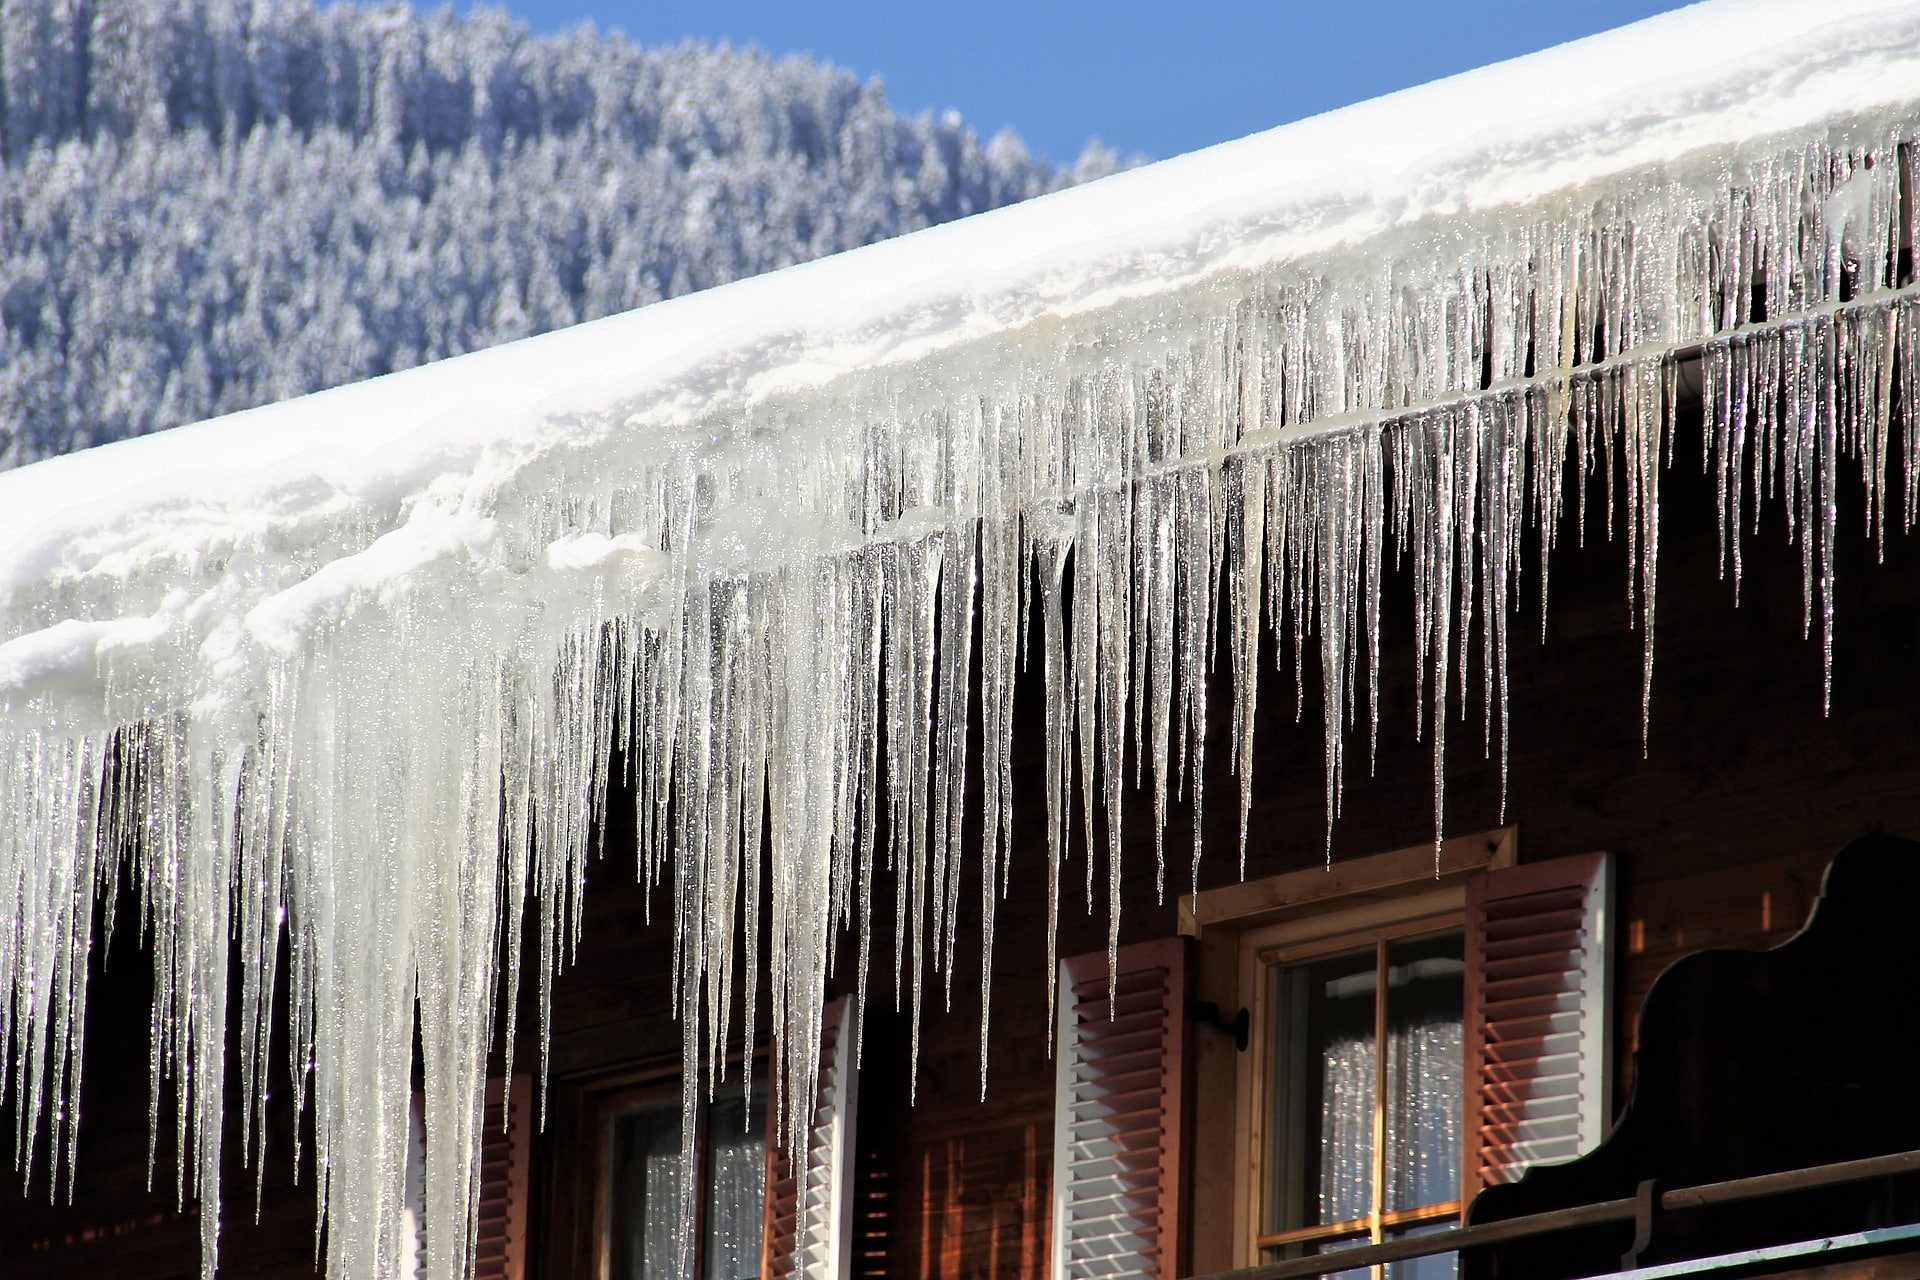 Gutter Repair in Winter: Why It’s So Important